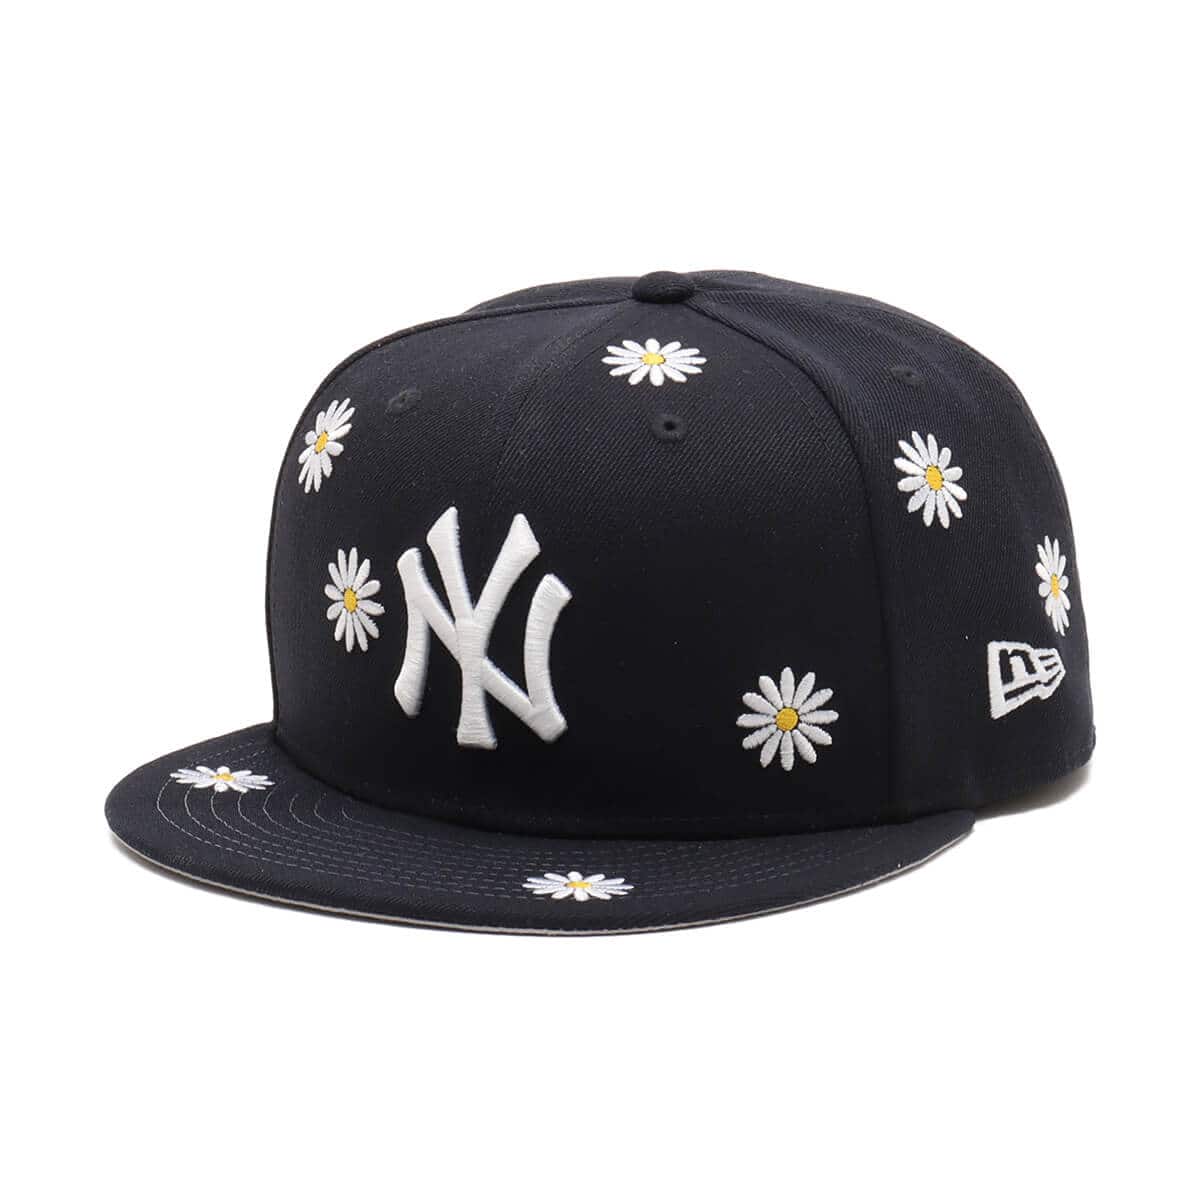 NEW ERA 59FIFTY Flower Embroidery New York Yankees NAVY